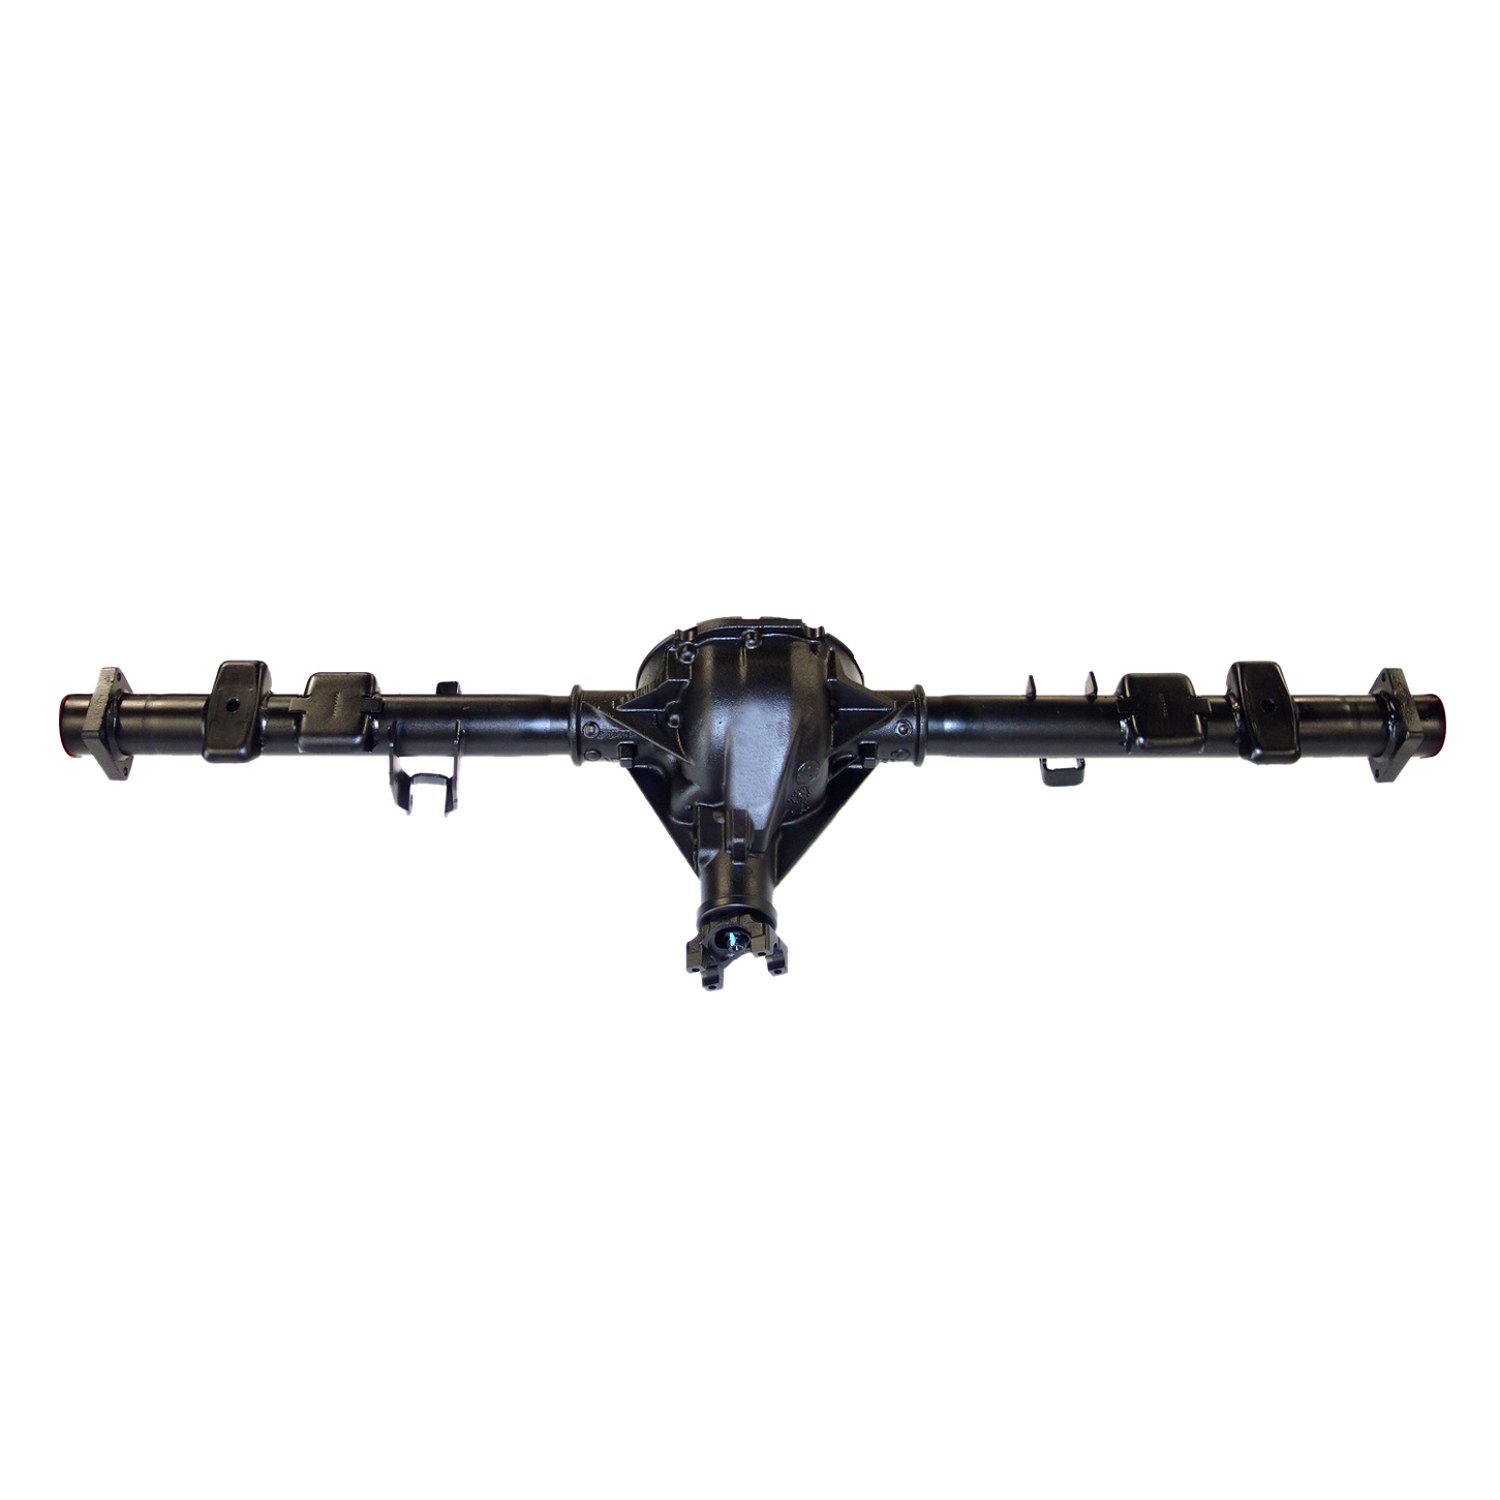 Remanufactured Axle Assy for GM 8.6" 05-07 Chevy Silverado 3.73 , Drum Brakes, Posi LSD